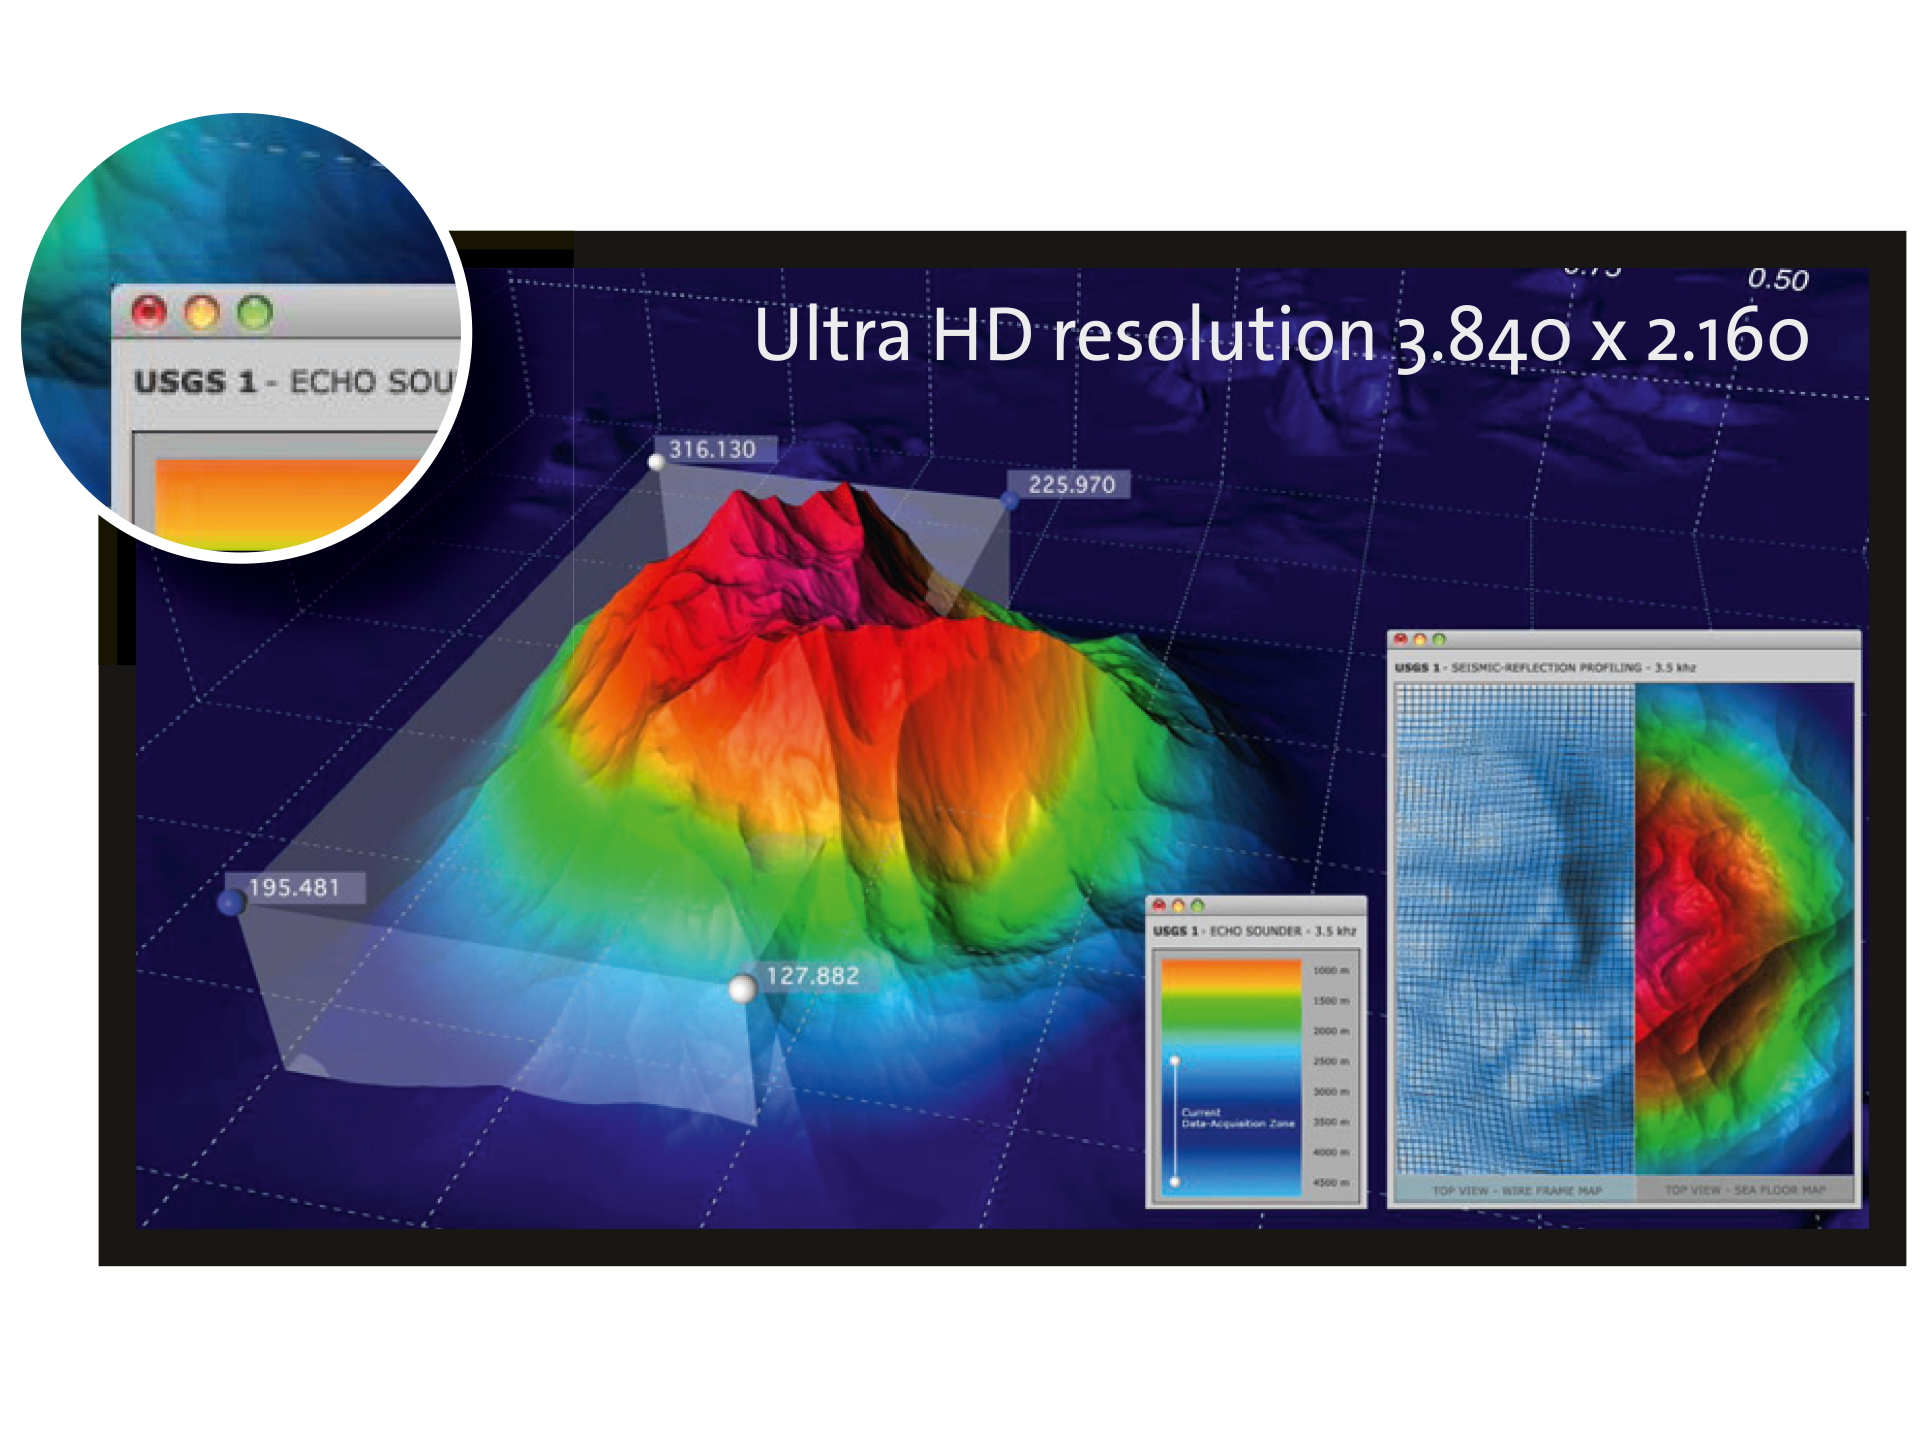 3D GlobeView 4K (UHD) Resolution in Perfection